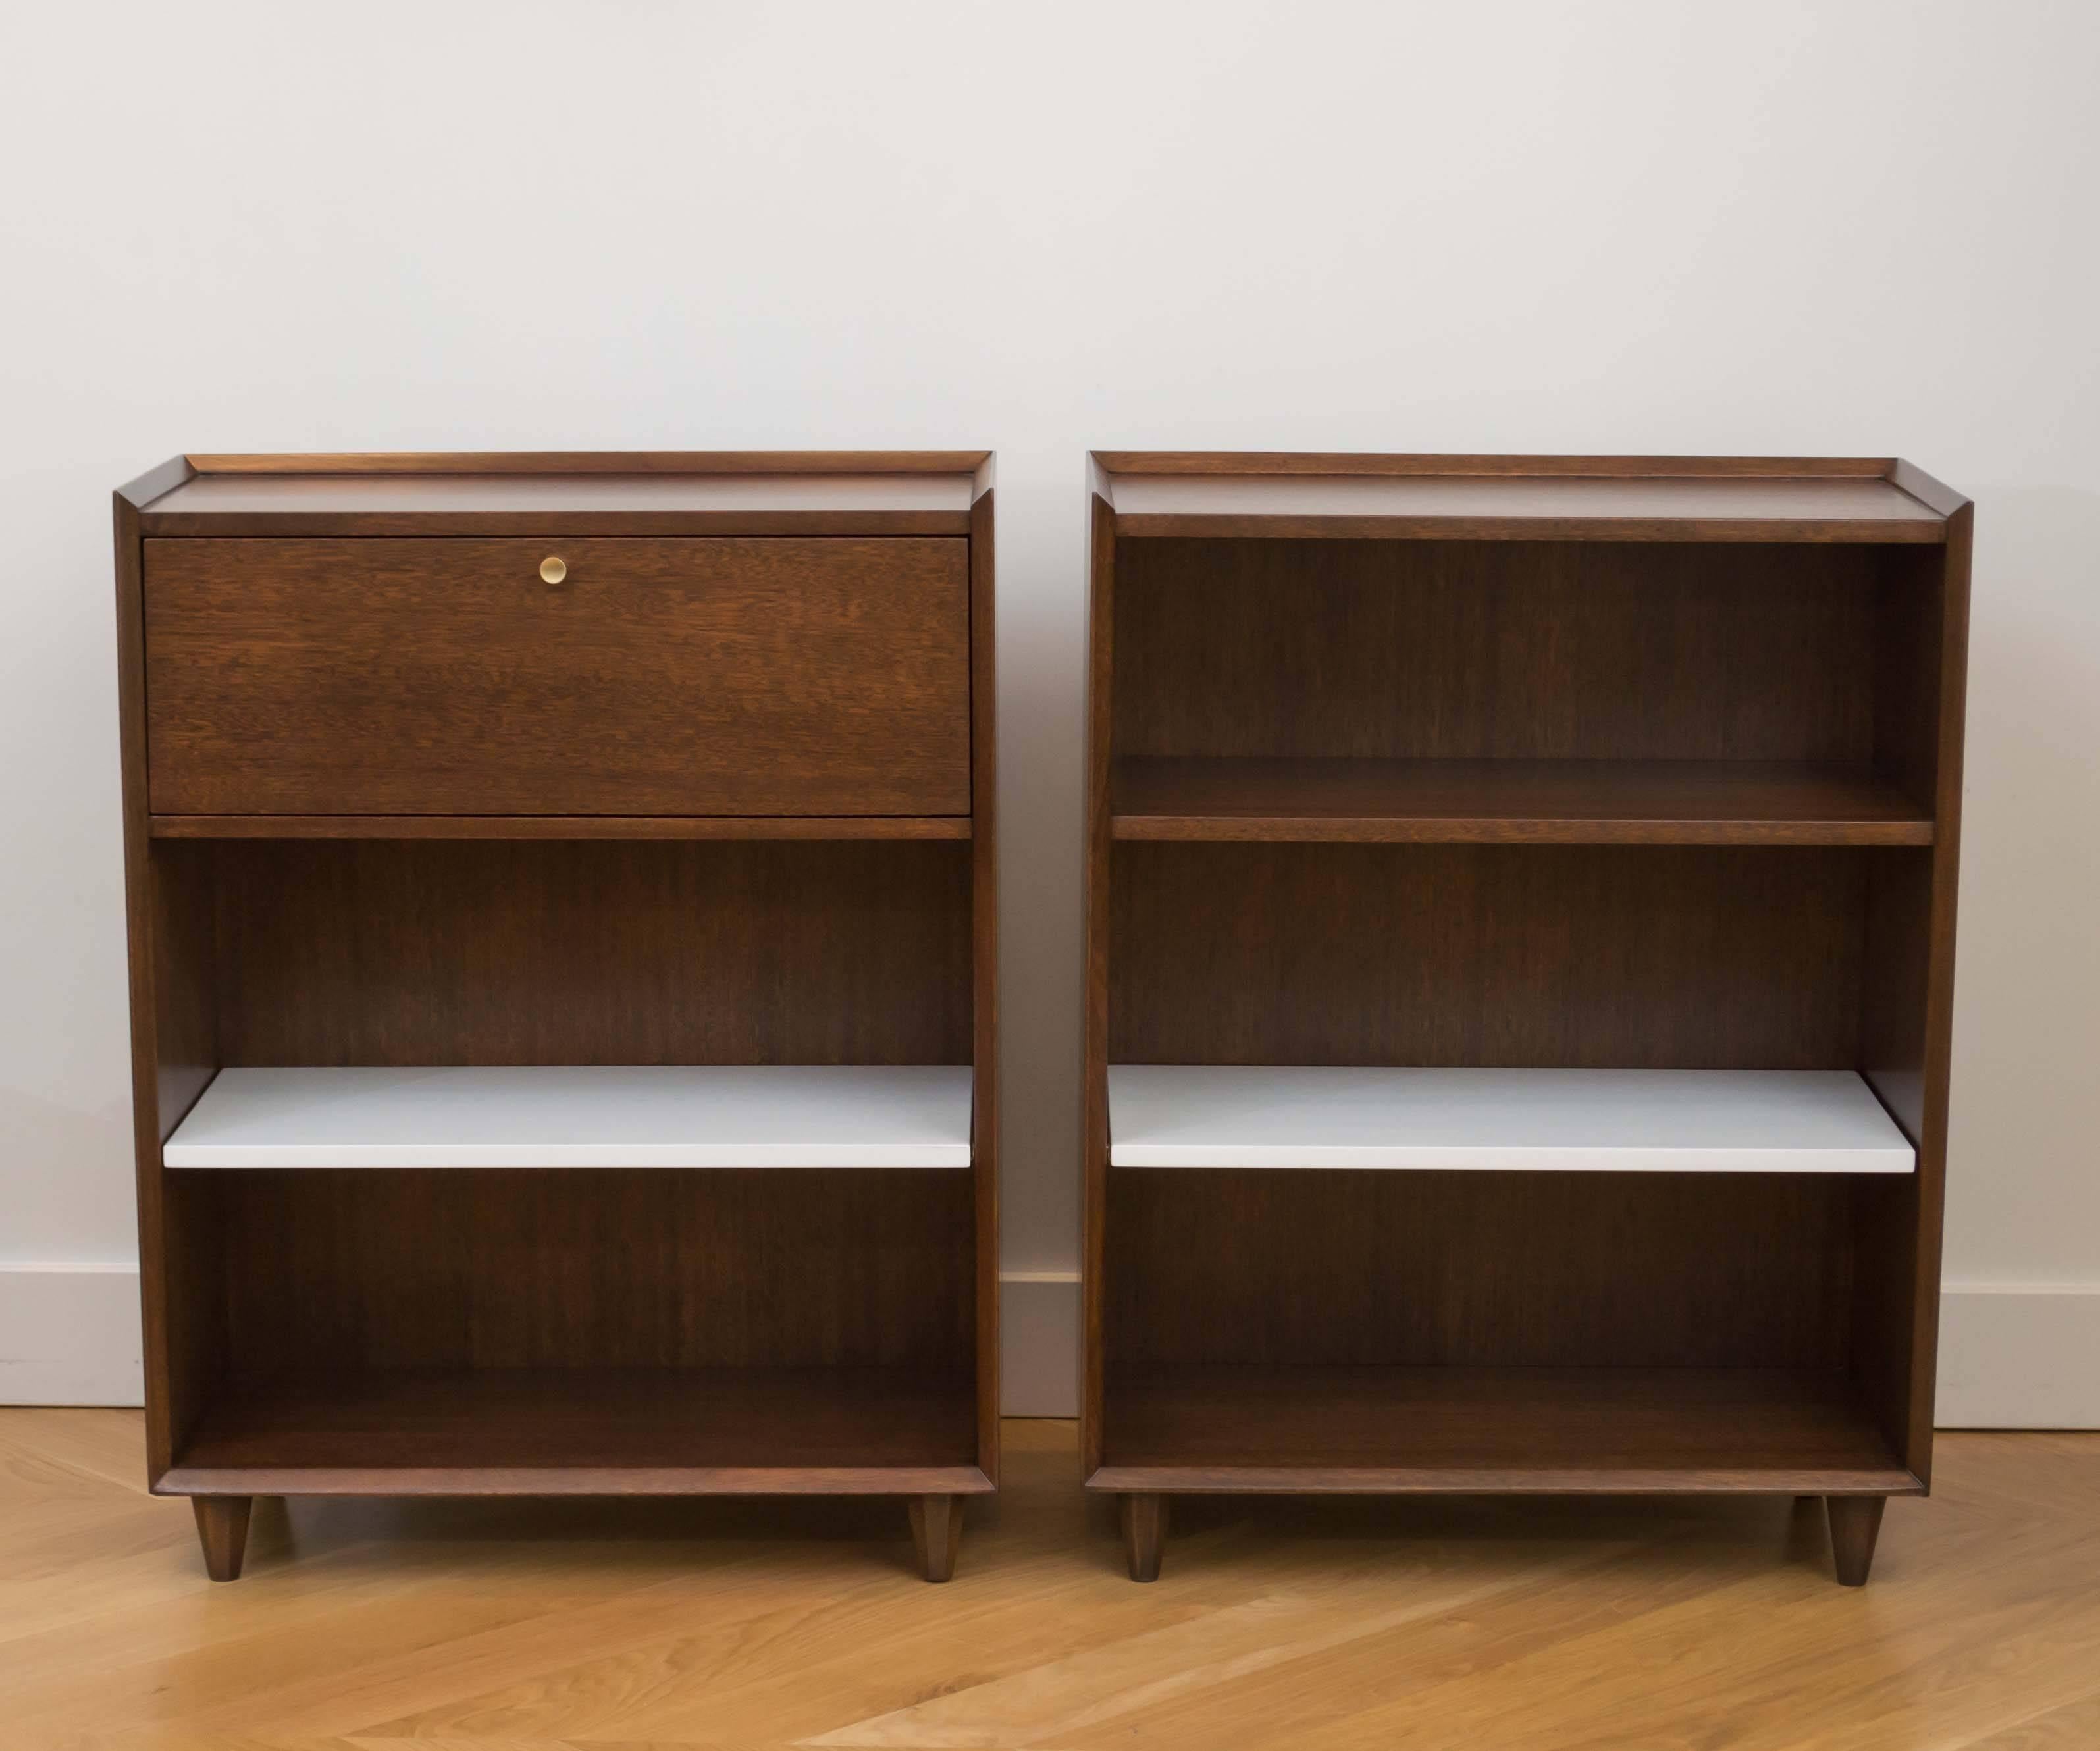 Beautifully refinished pair of mahogany shelves by Gilbert Rohde for Brown Saltman. One of the shelves has a small pull down that becomes a writing desk, with a white lacquered adjustable shelf.